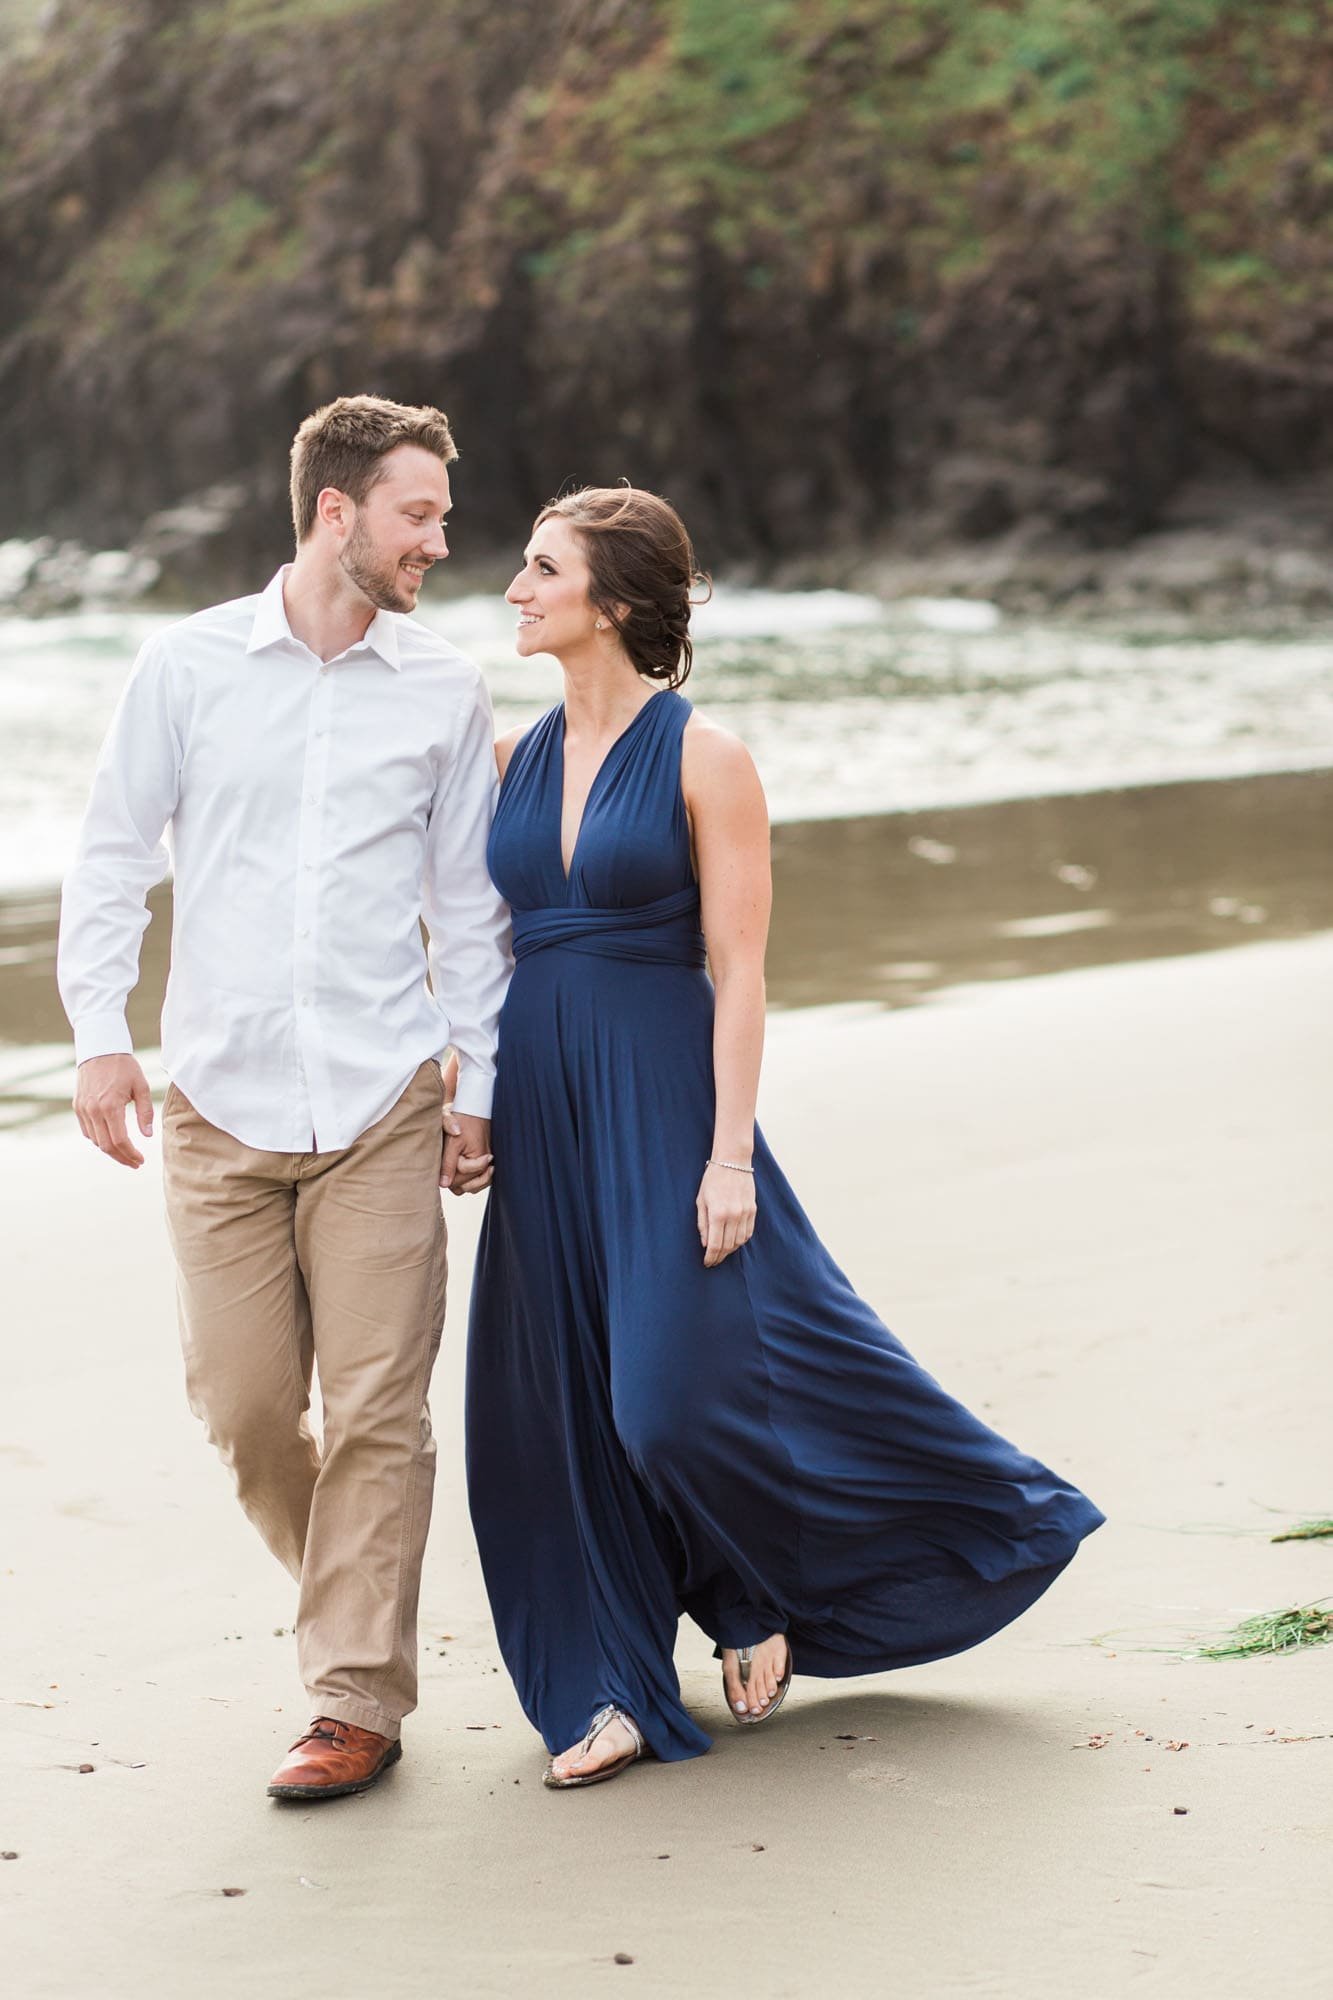 Wind blows dress during engagement session at Ecola State Park